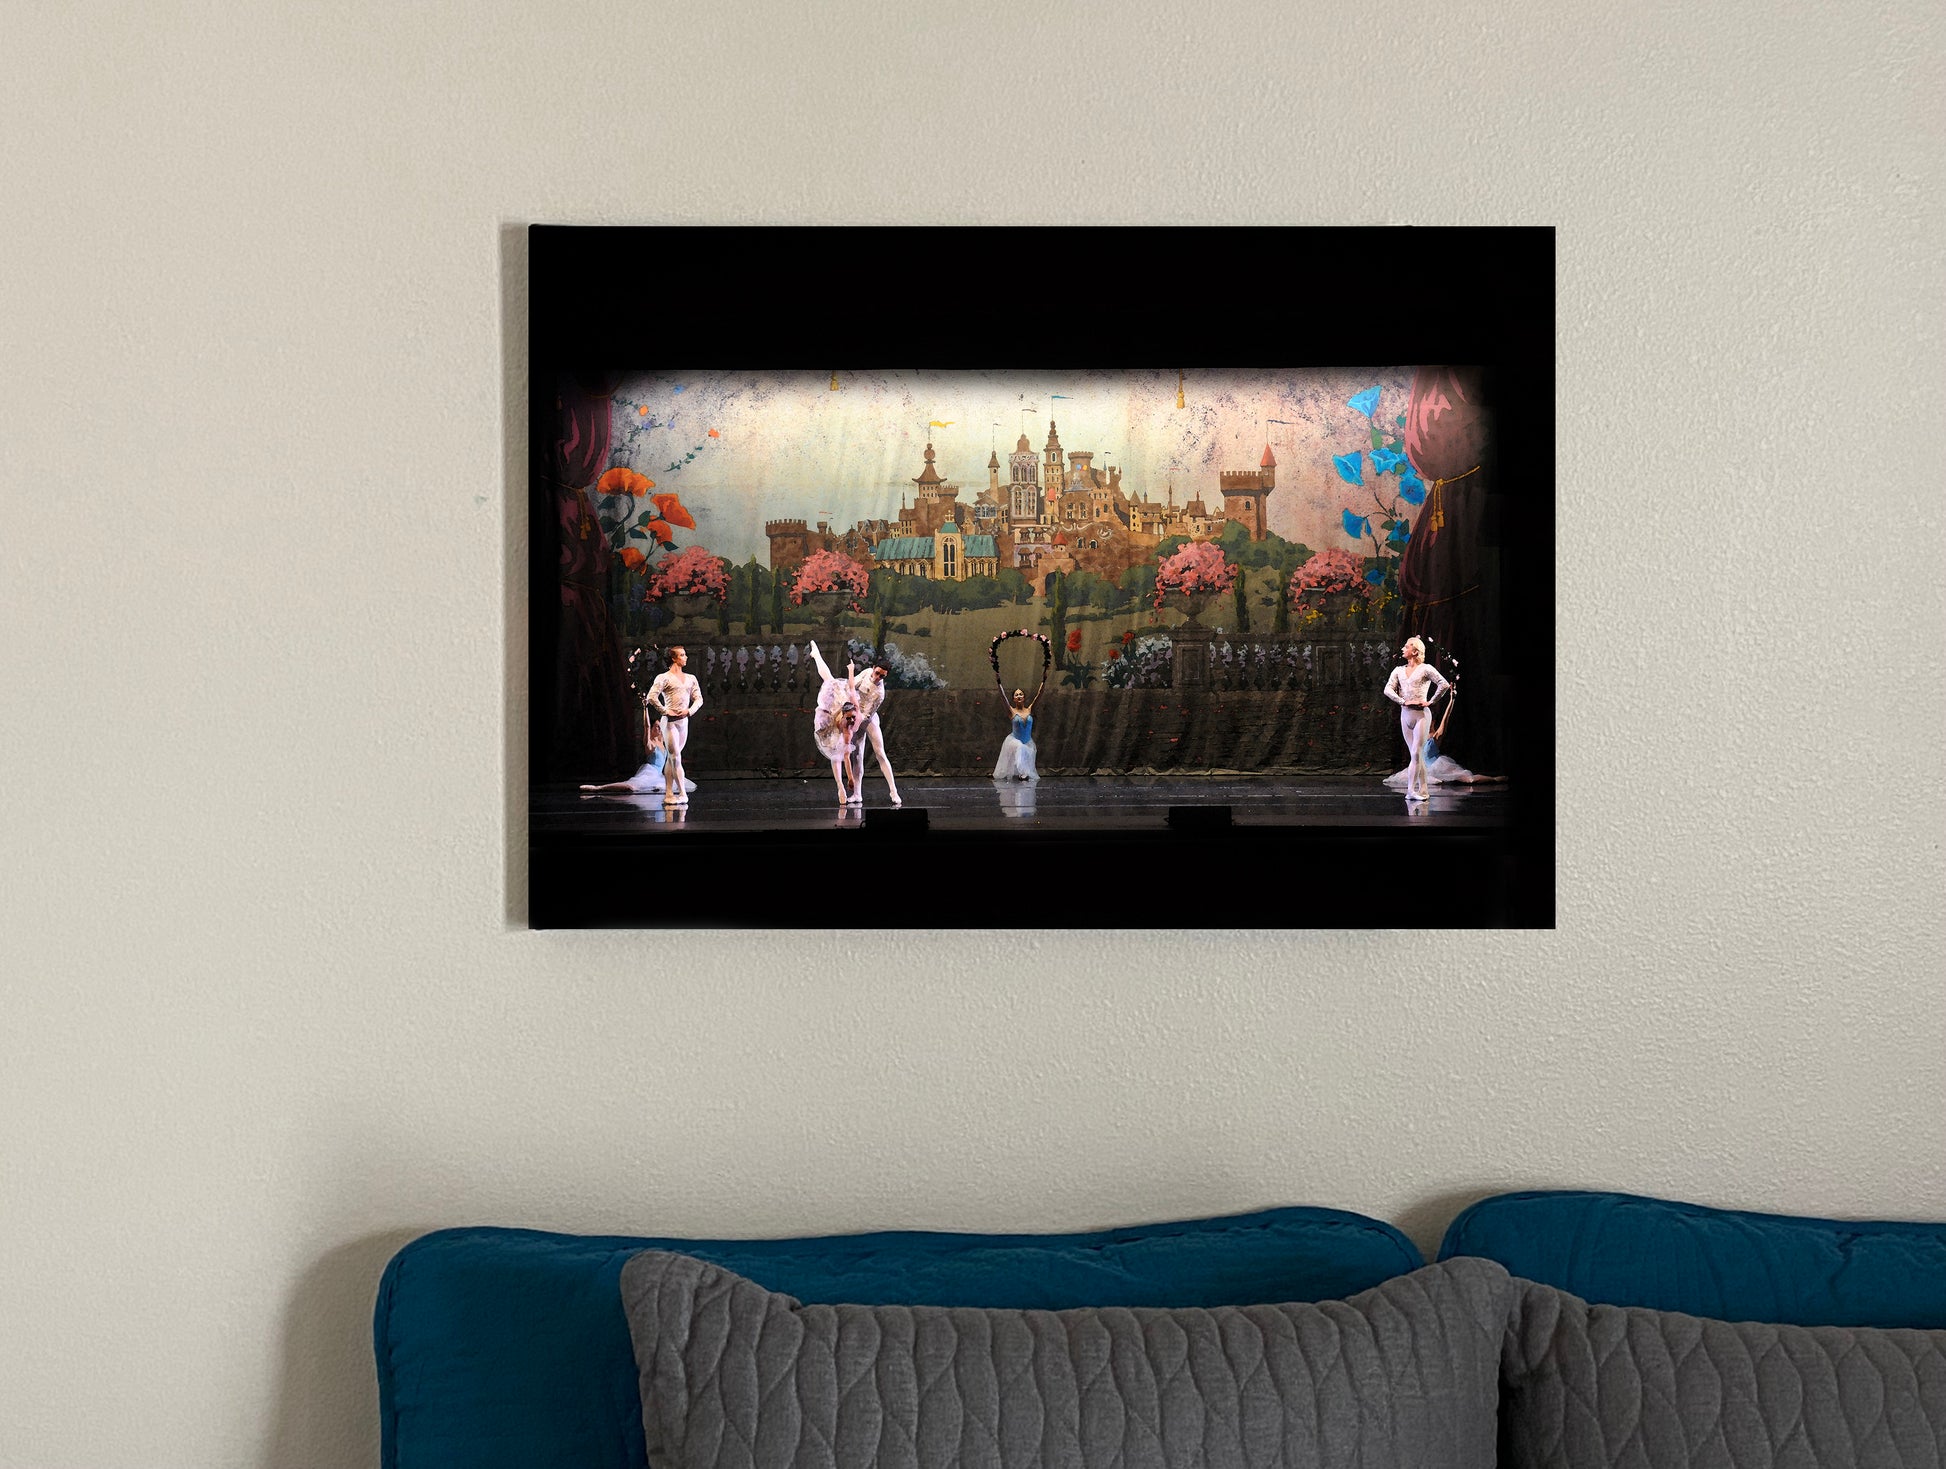 ballet performers on stage with a fairytale castle background performing the Nutcracker 3 male dancers and 4 female